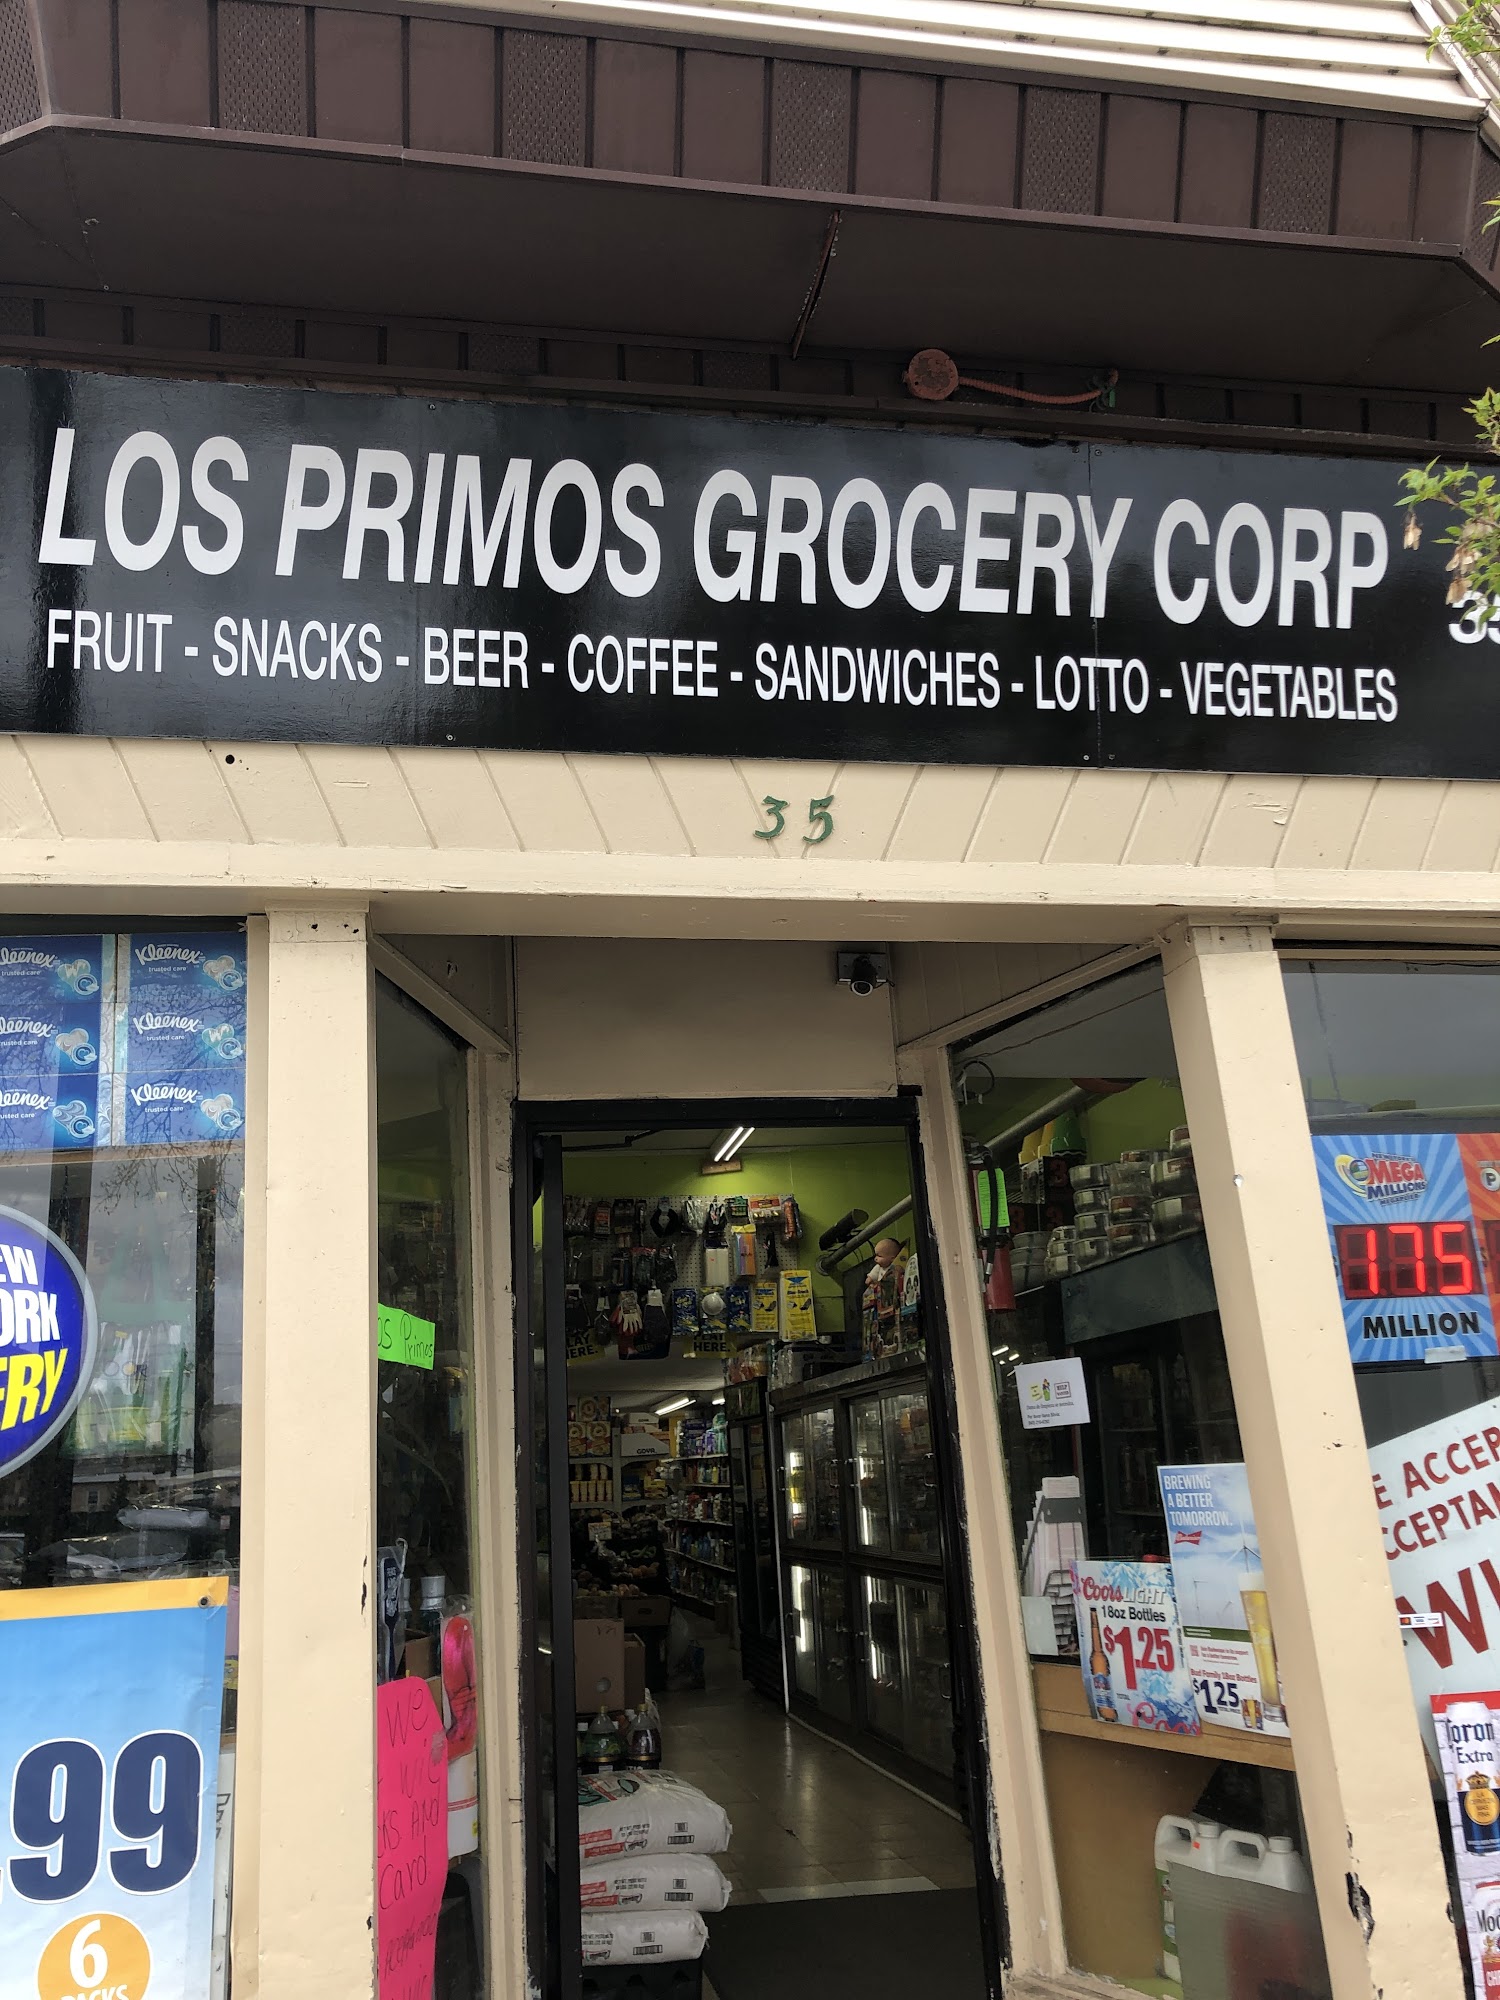 Los Primos grocery store Corp